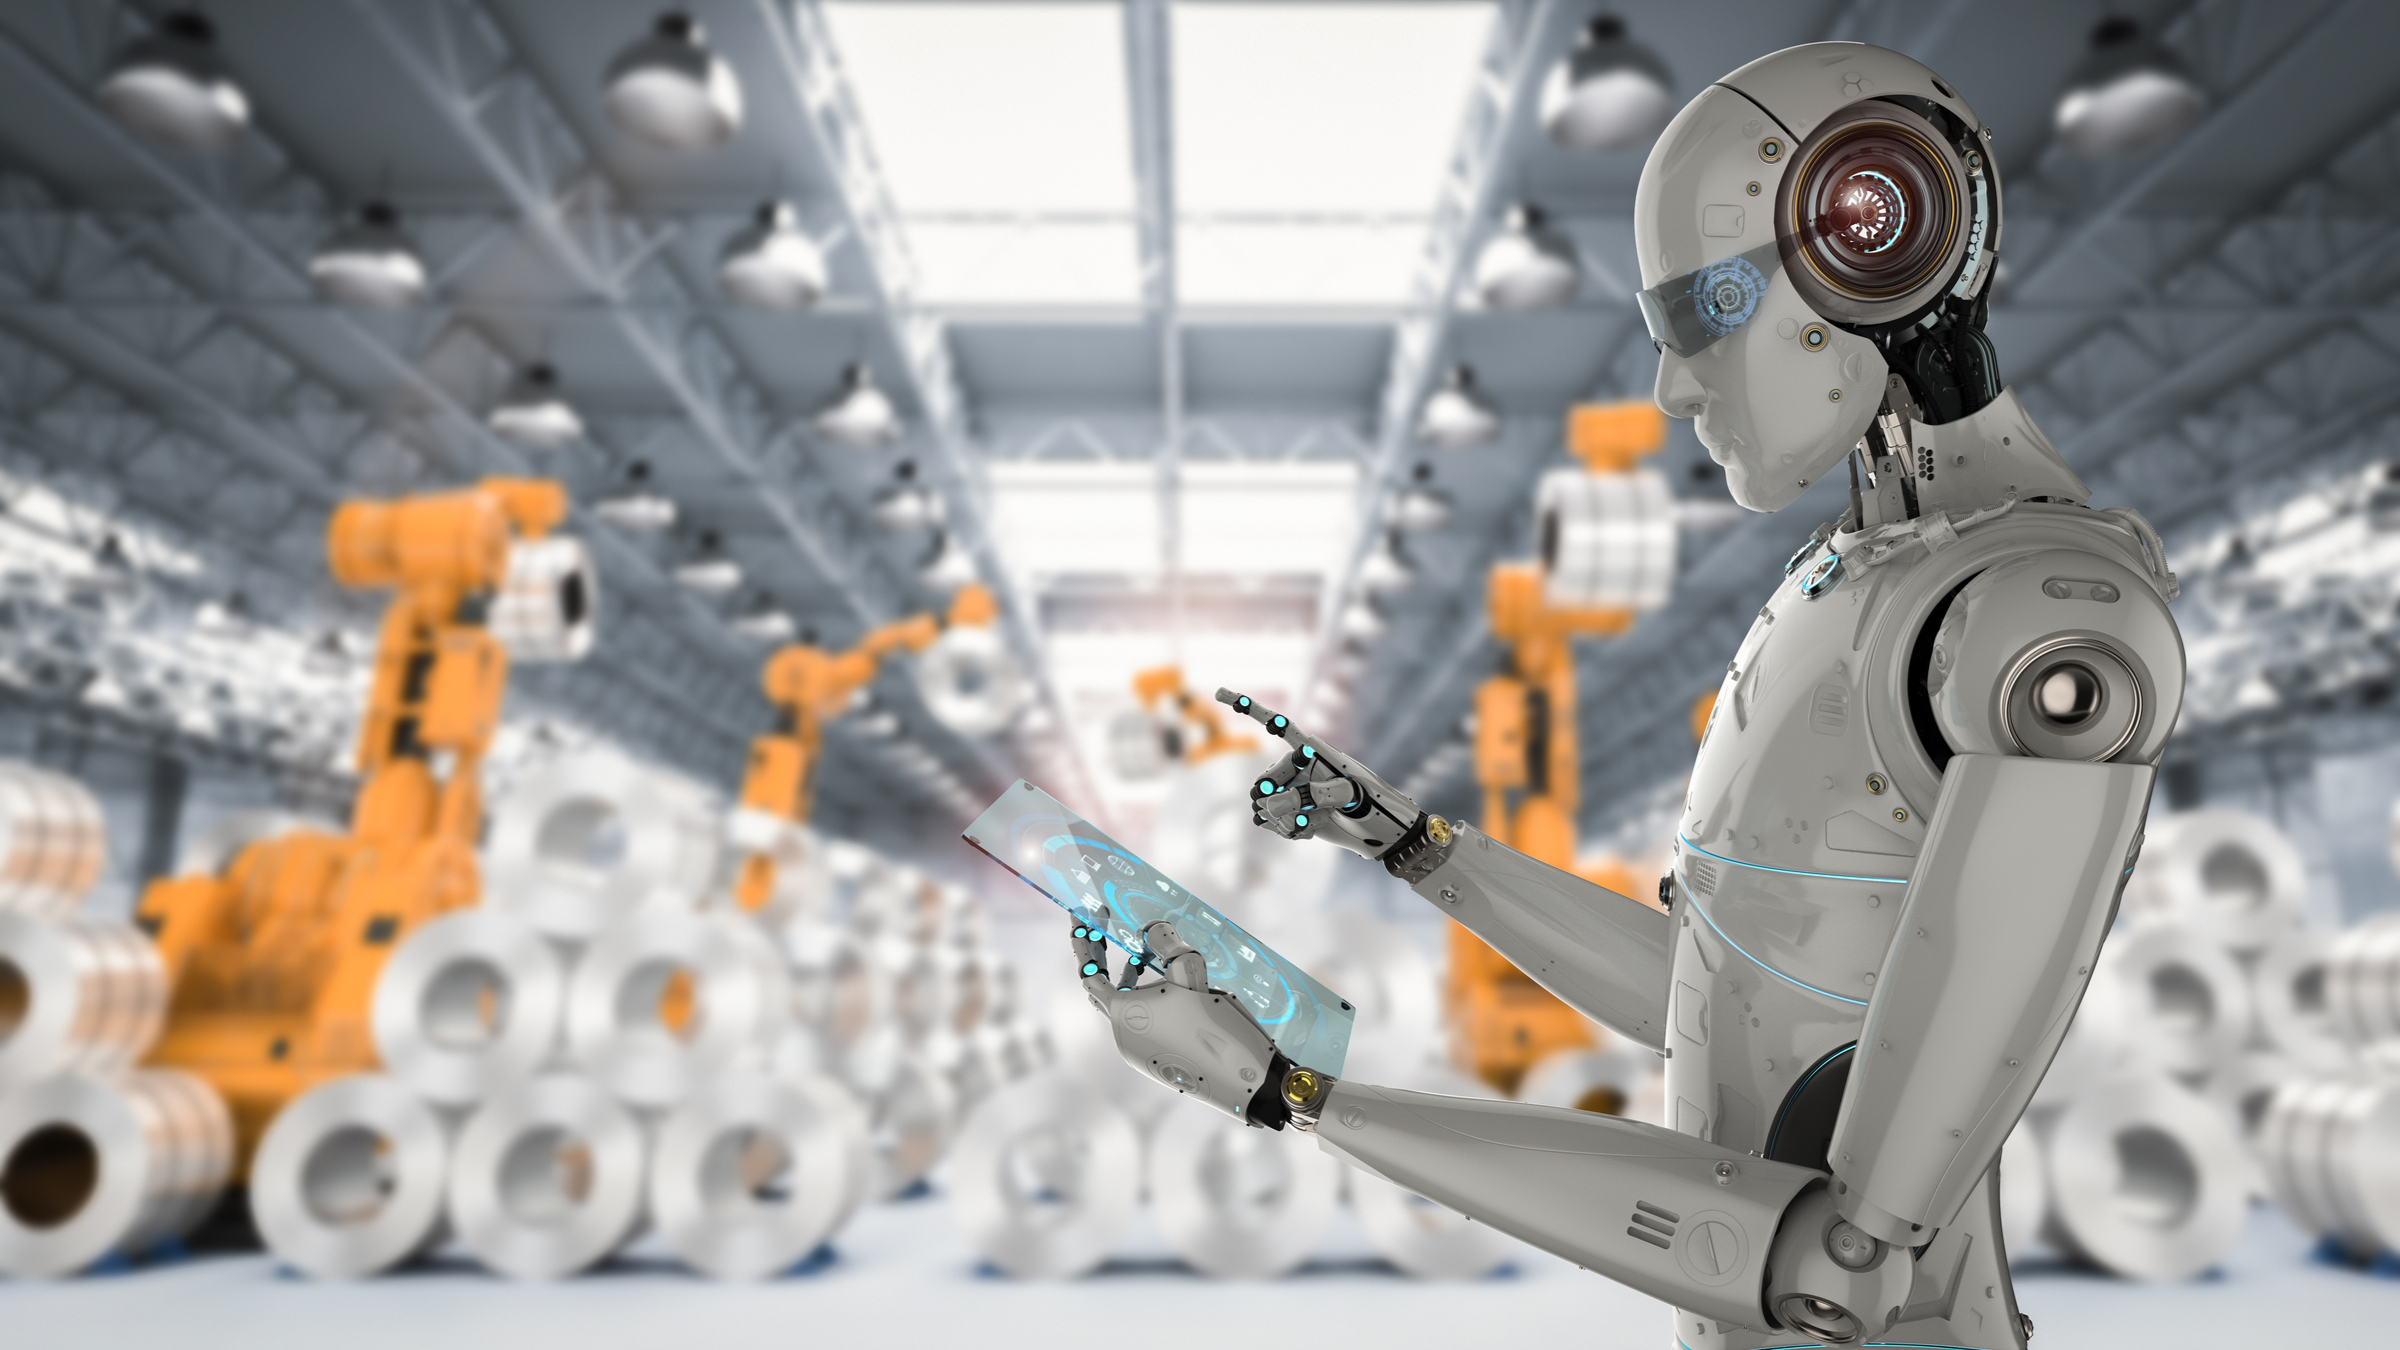 A.I. For Smarter Factories - The World of Industrial Artificial